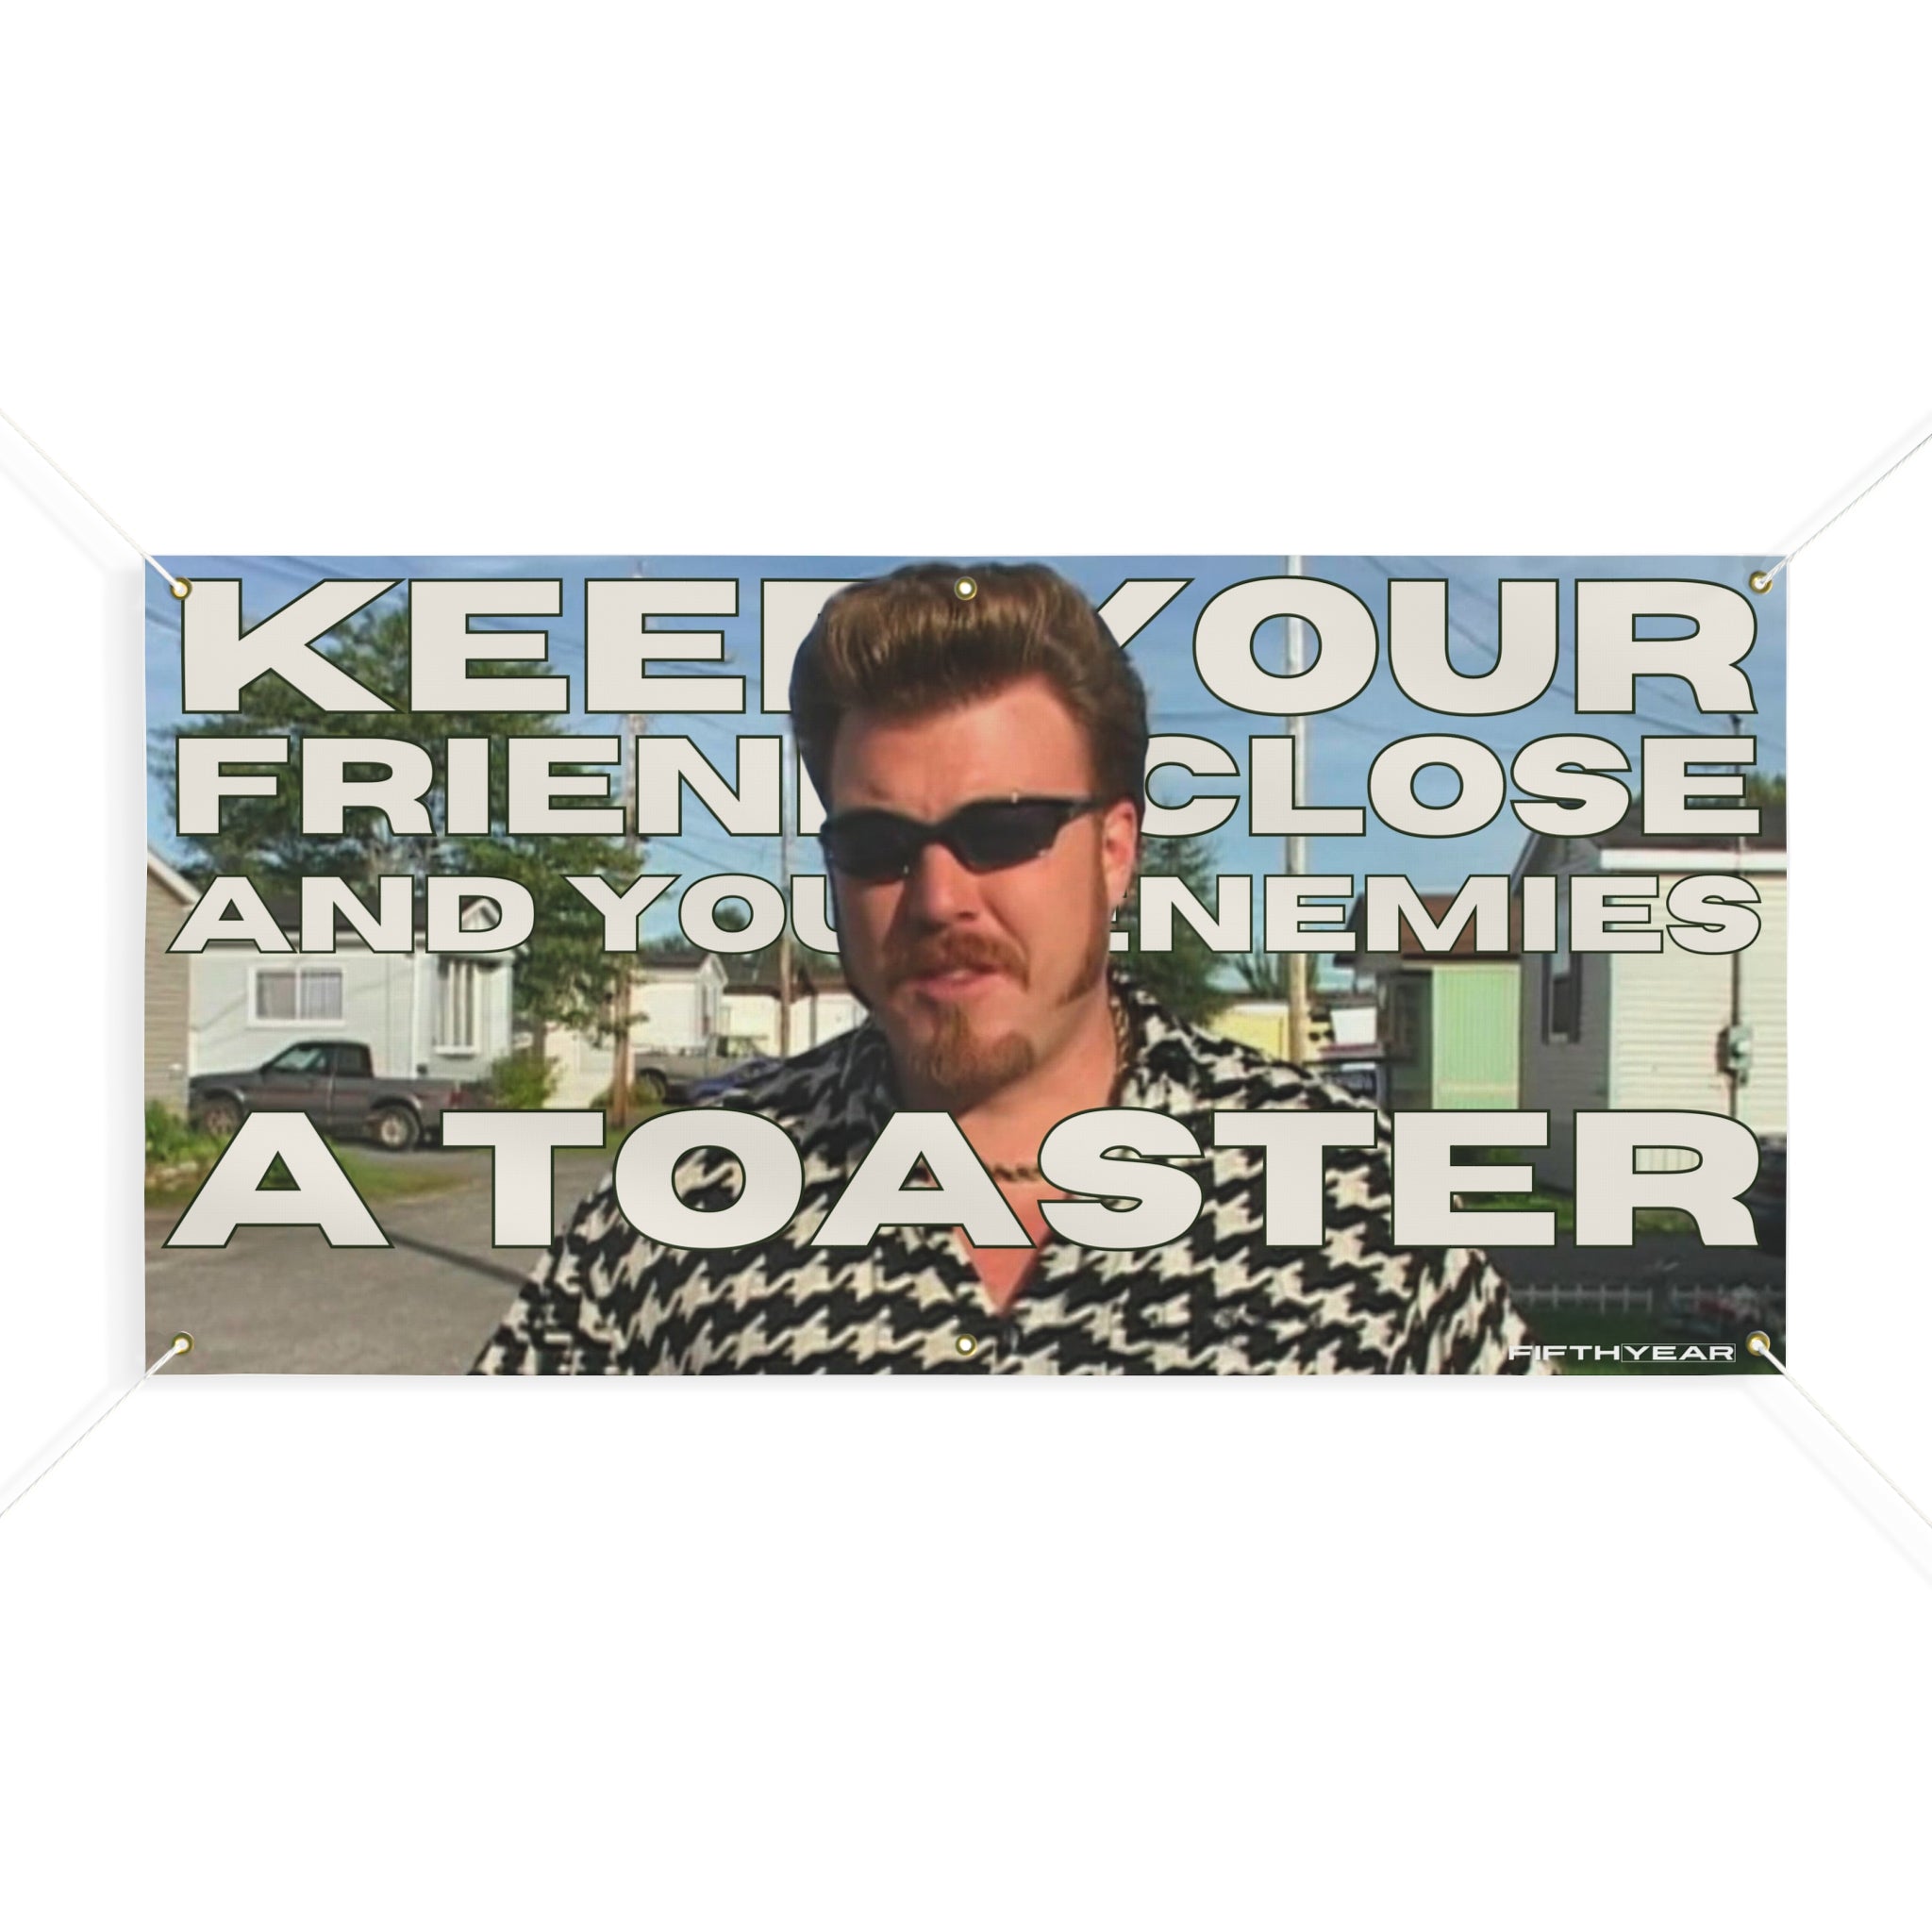 Ricky Trailer Park Boys "Keep your friends close and your enemies a toaster" - Flag